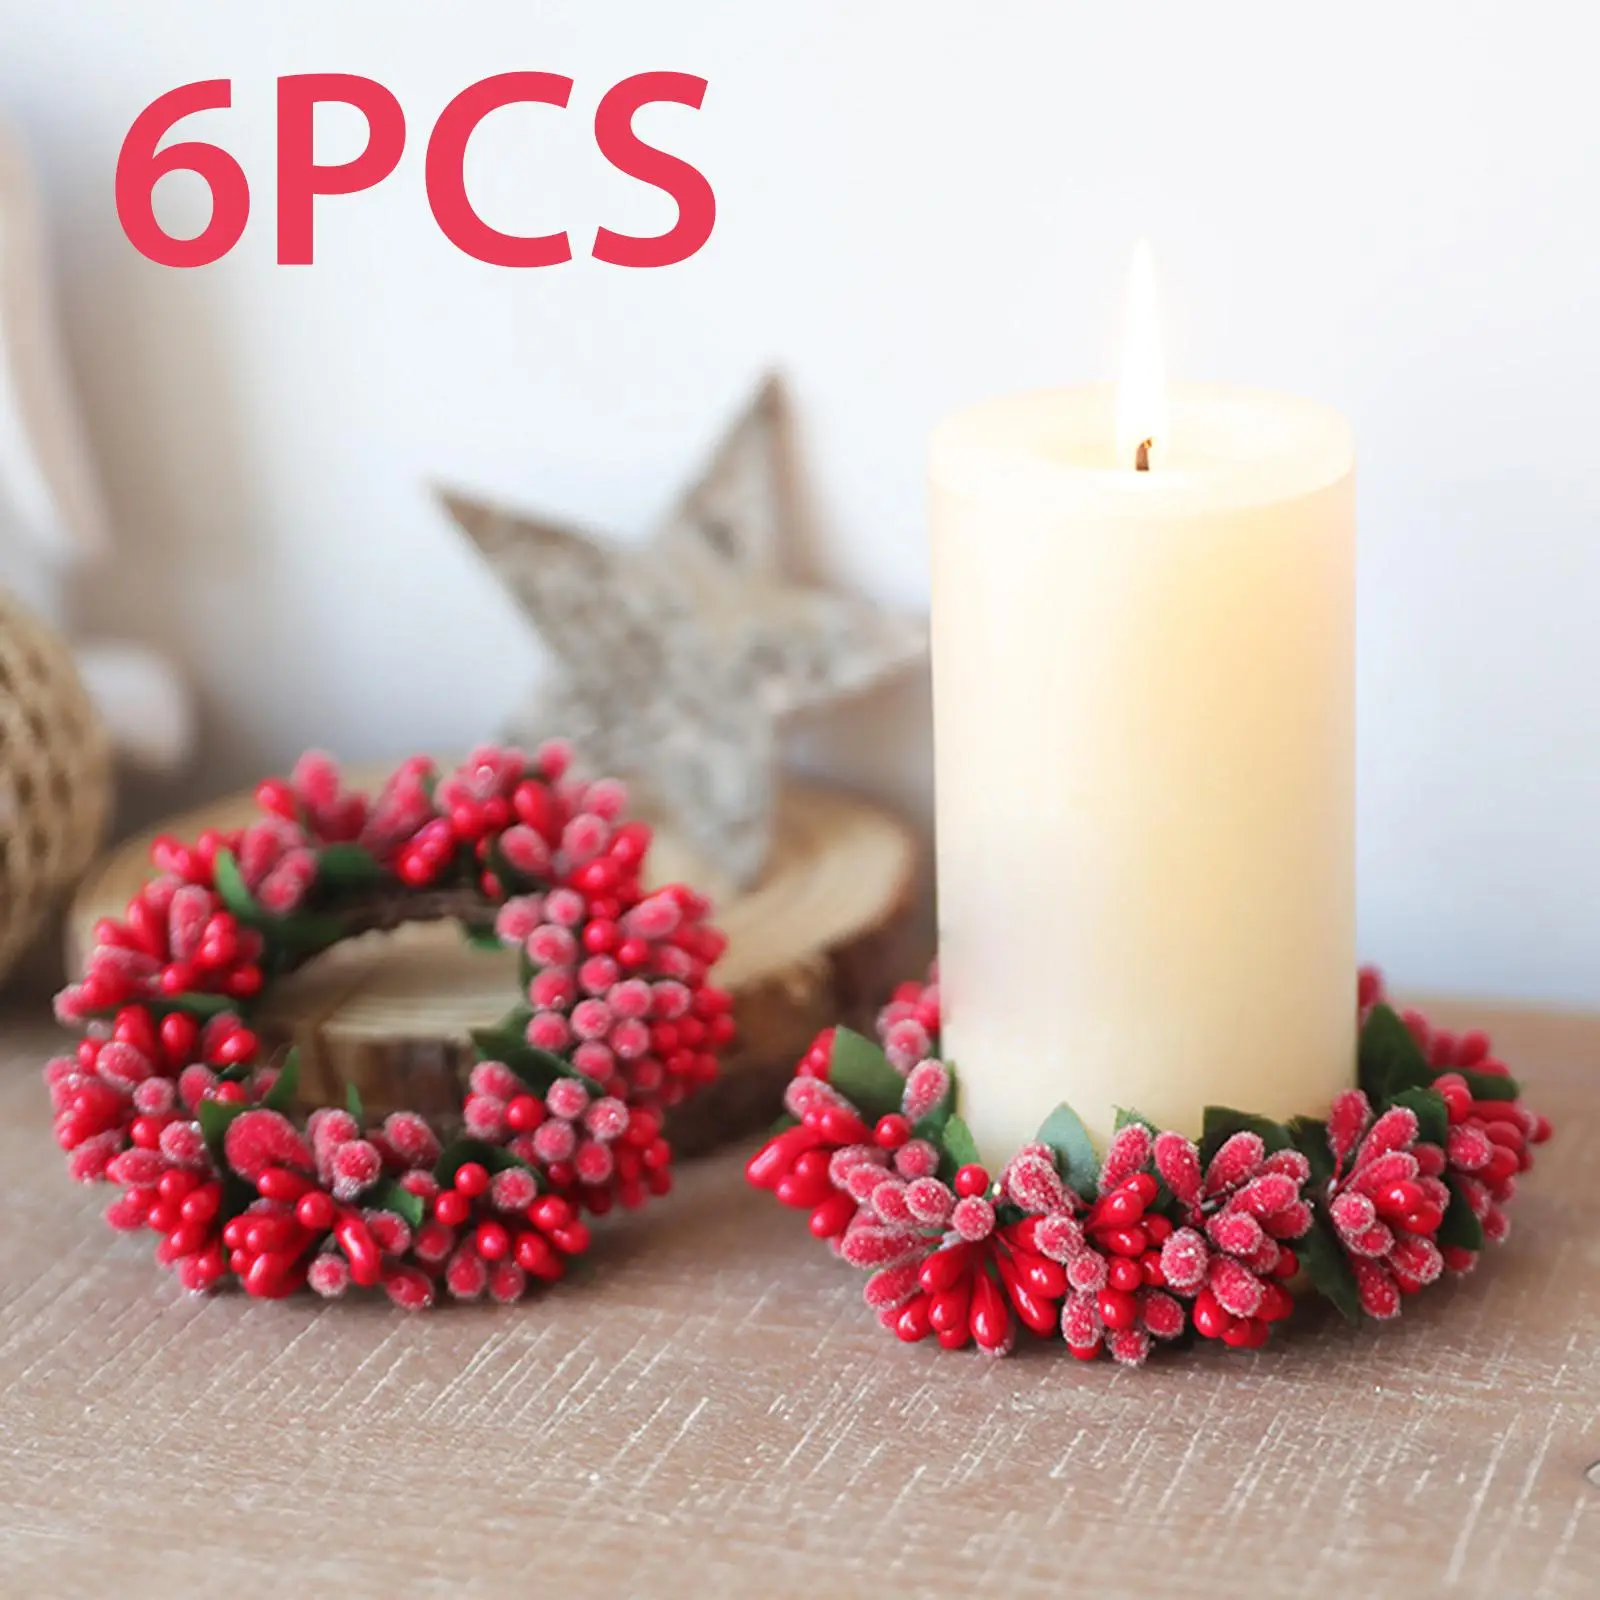 6Pcs Red Berries Candle Ring Wreath Small Boho Wreath for Table Home Dinner